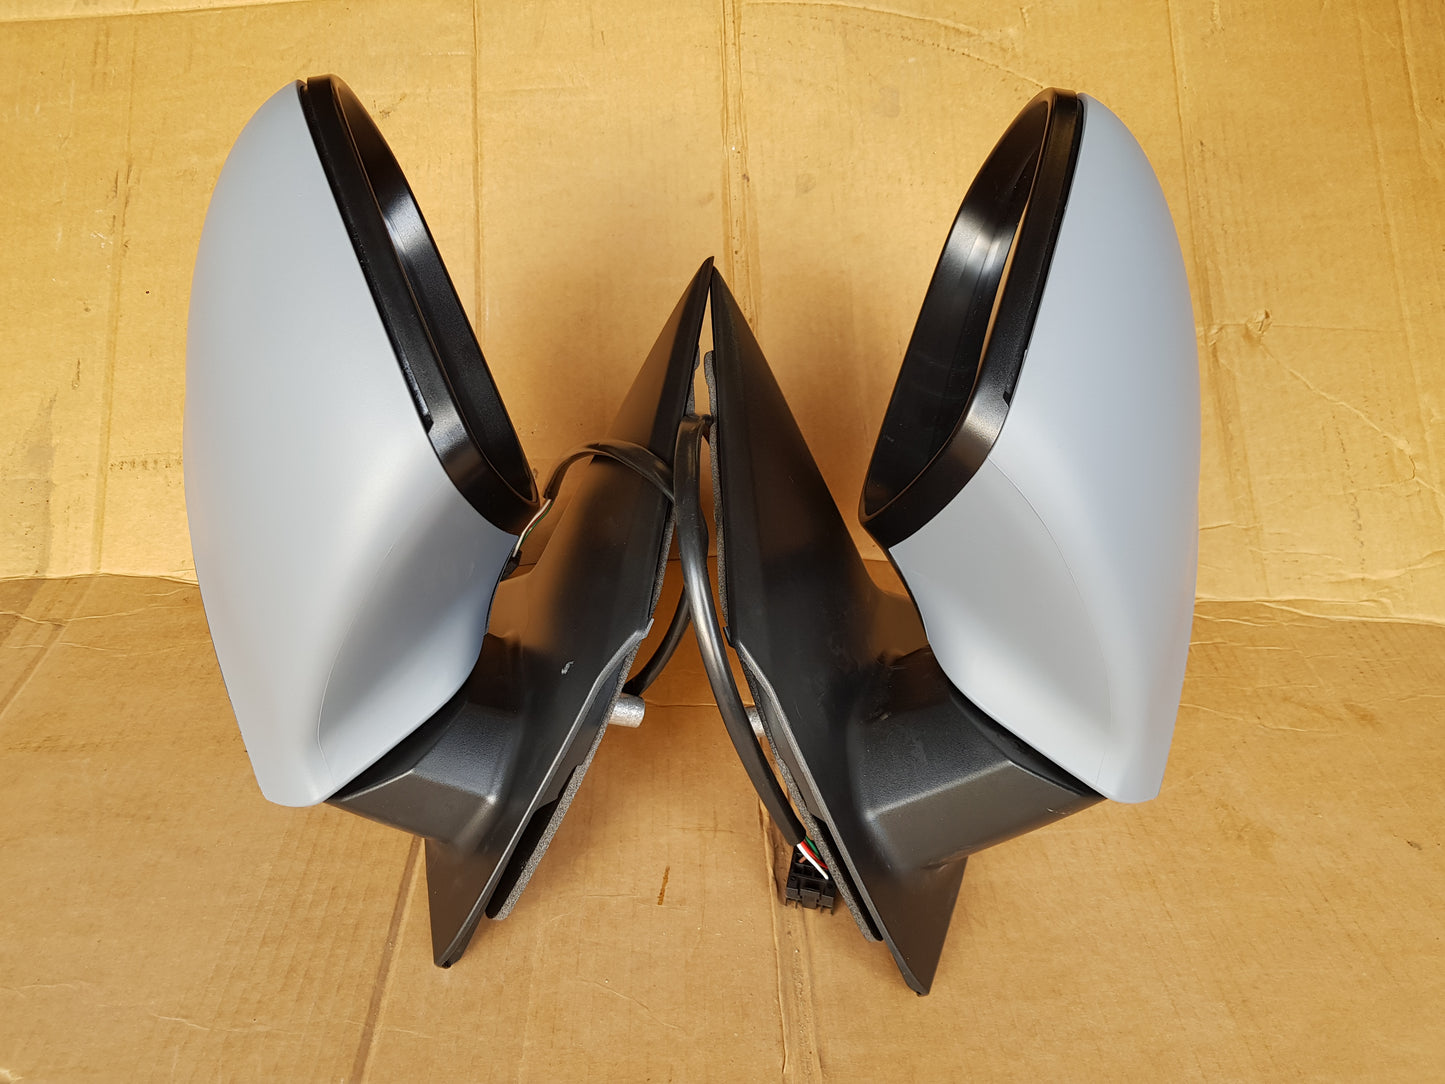 VW T6 T6.1 Transporter Caravelle Front Cab Side Door Wing Mirror Electric adjust heated glass with Primed cover LEFT SIDE